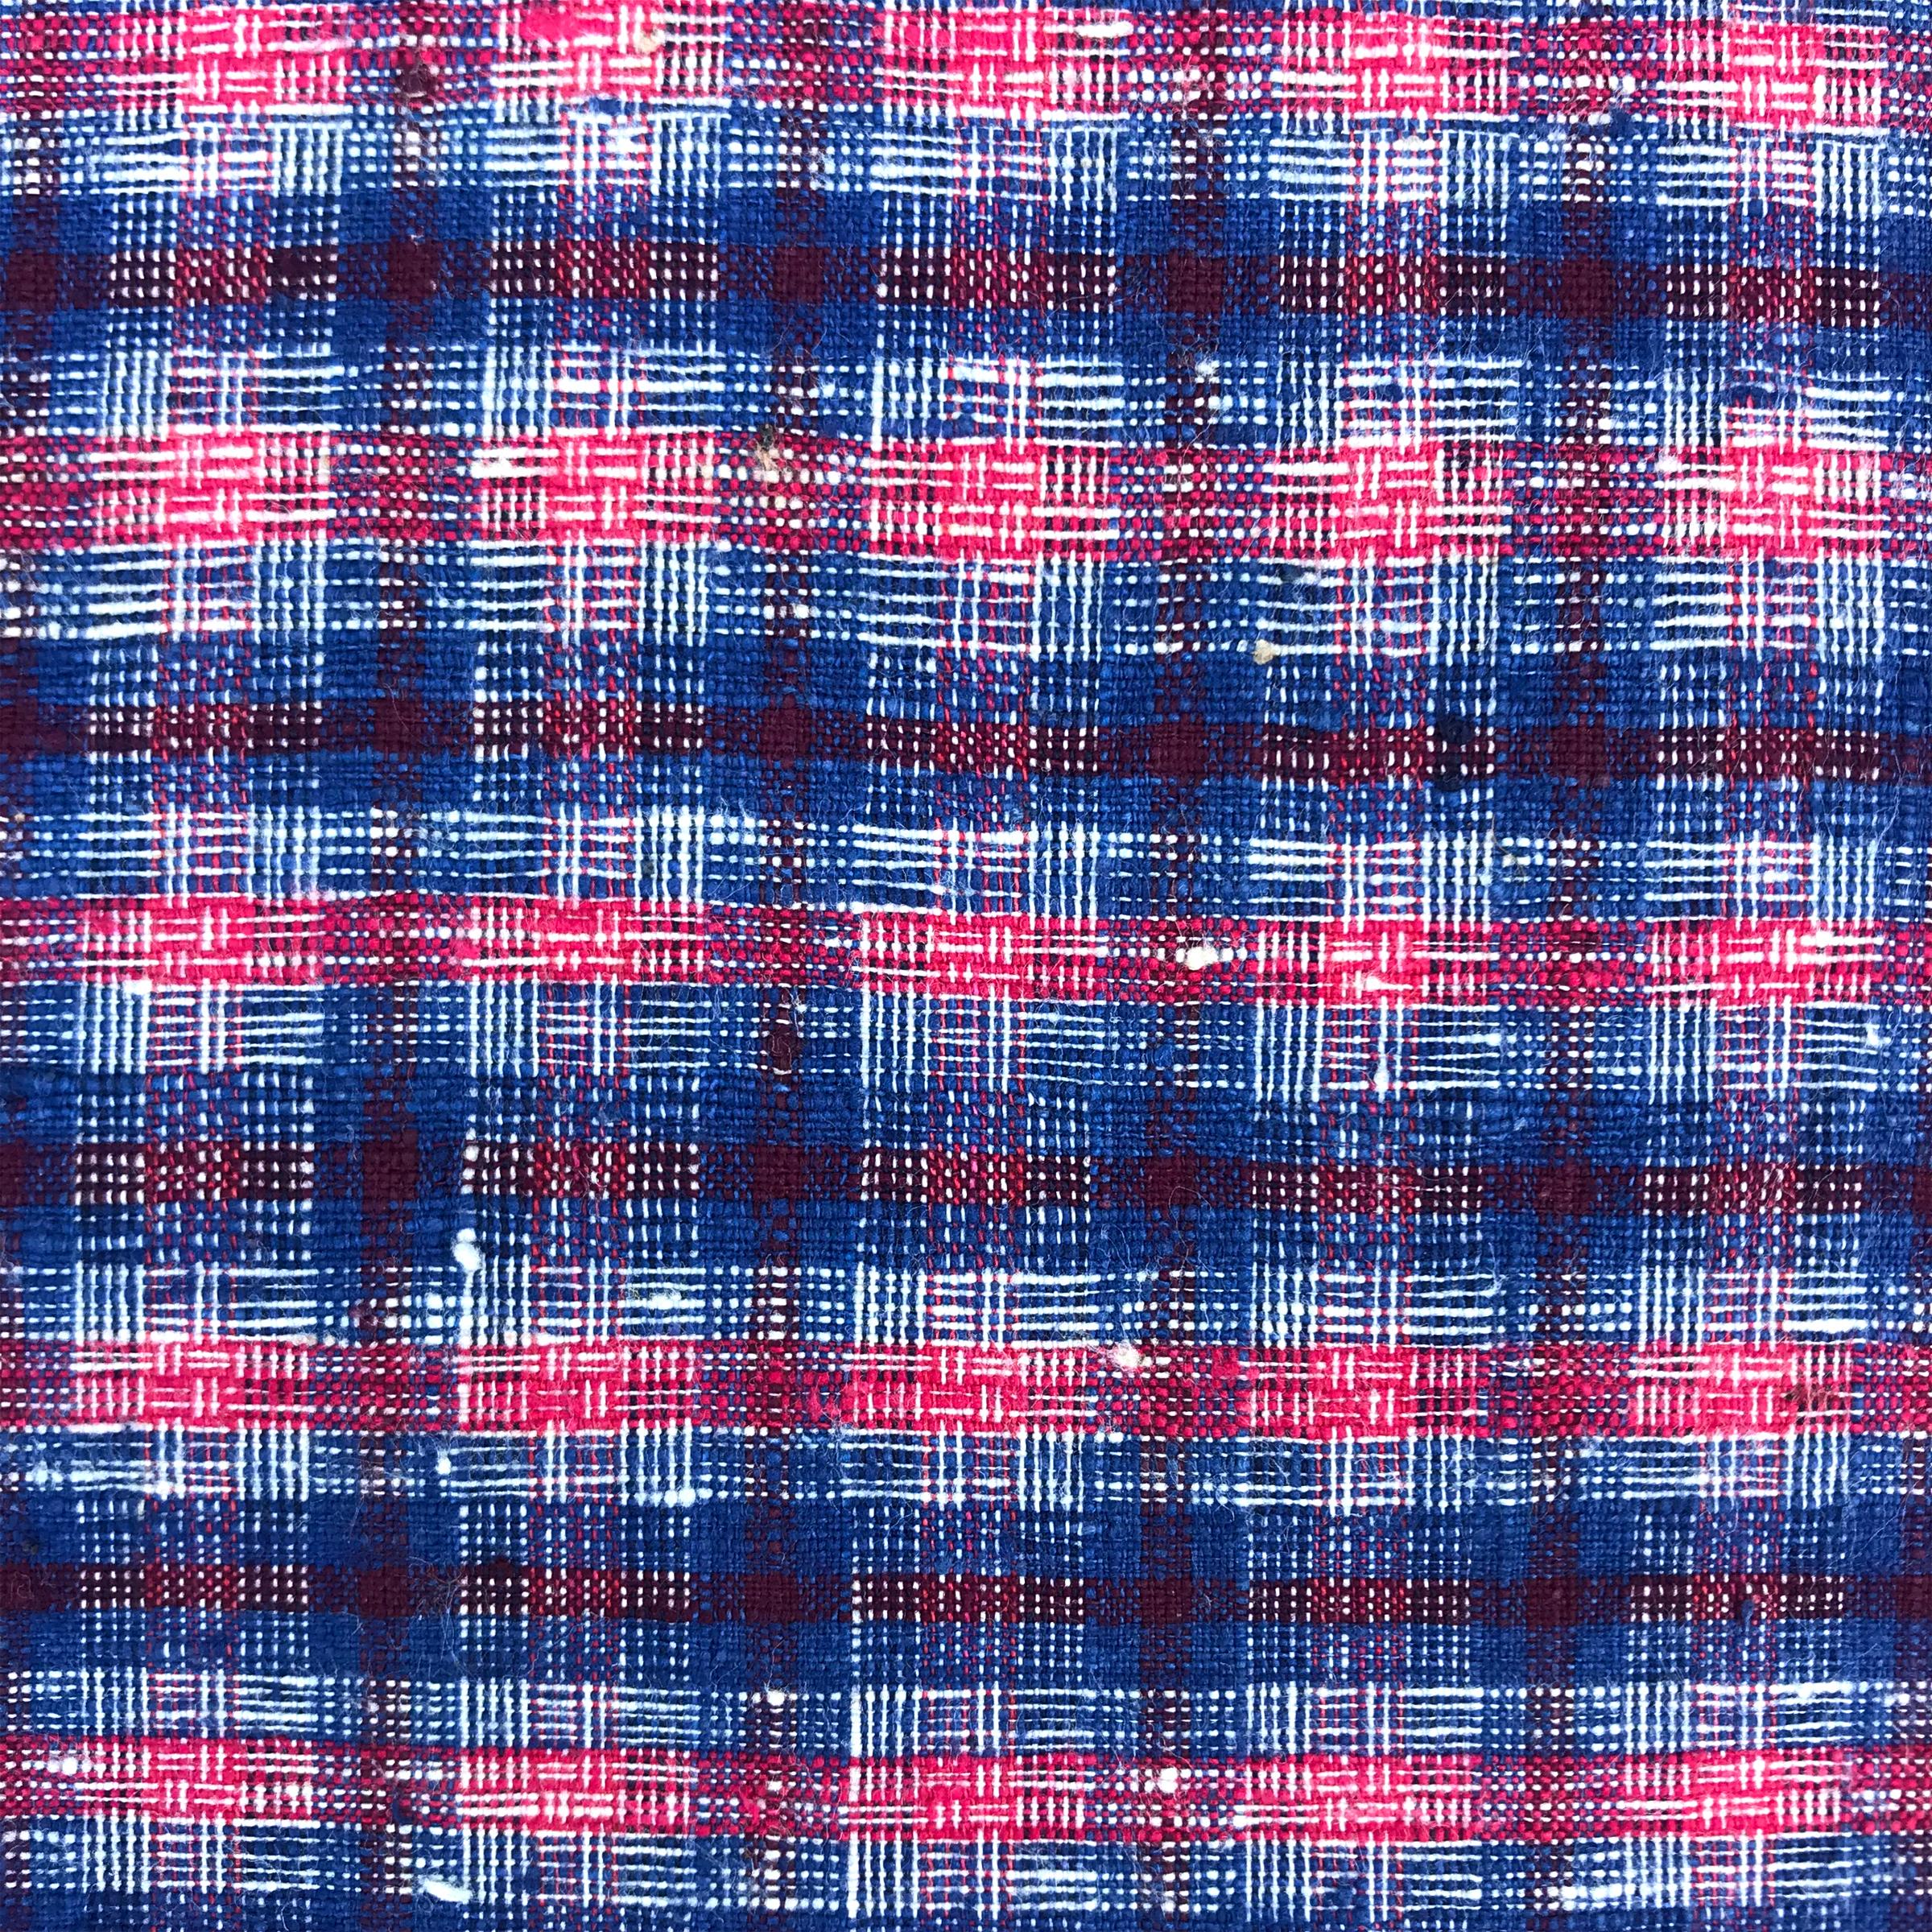 Pair of Vintage Chinese Cotton Plaid Pillows 1